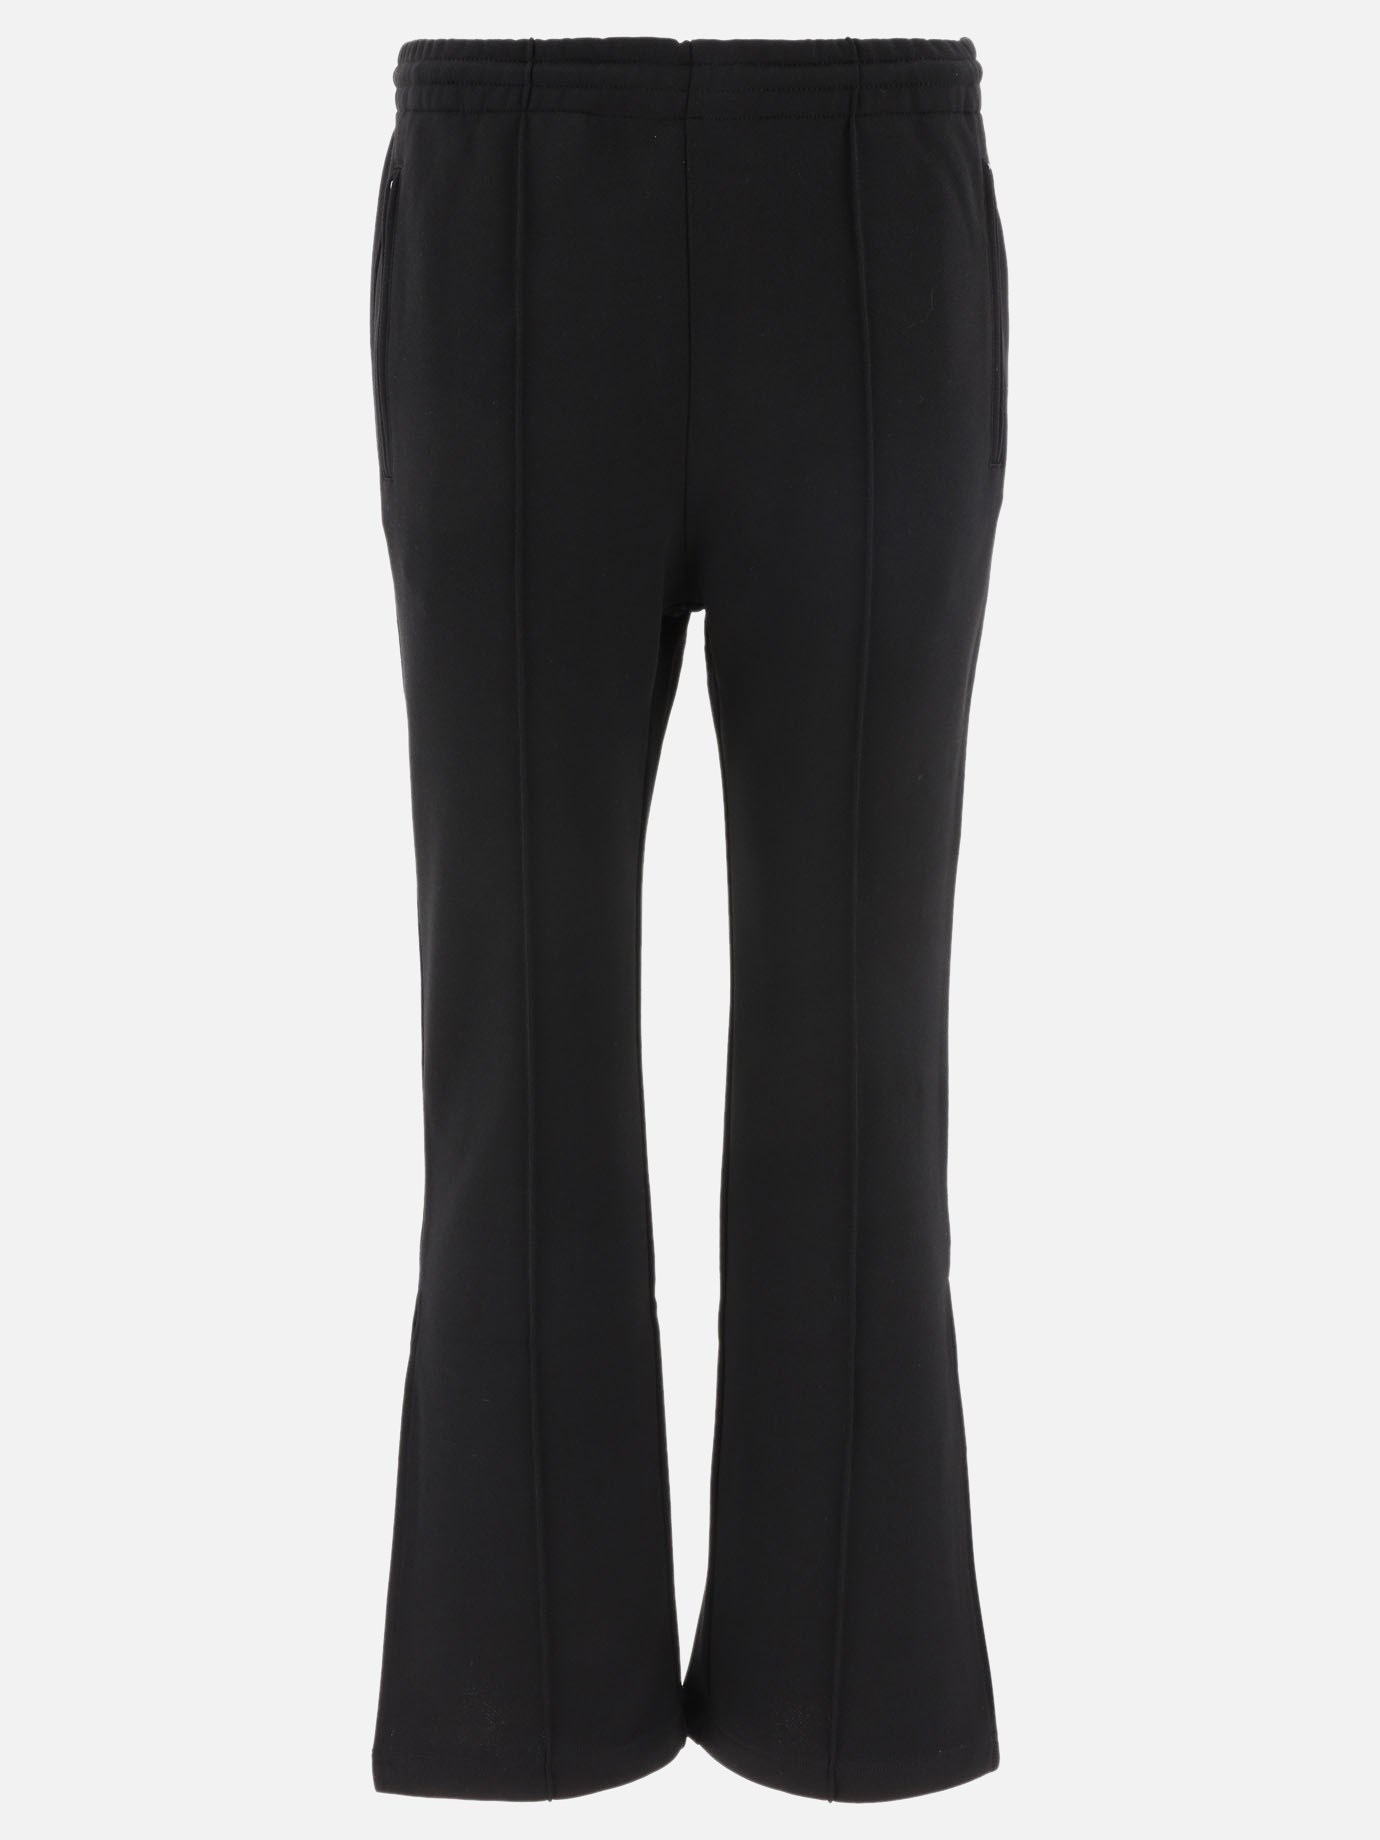 Trousers with split ends